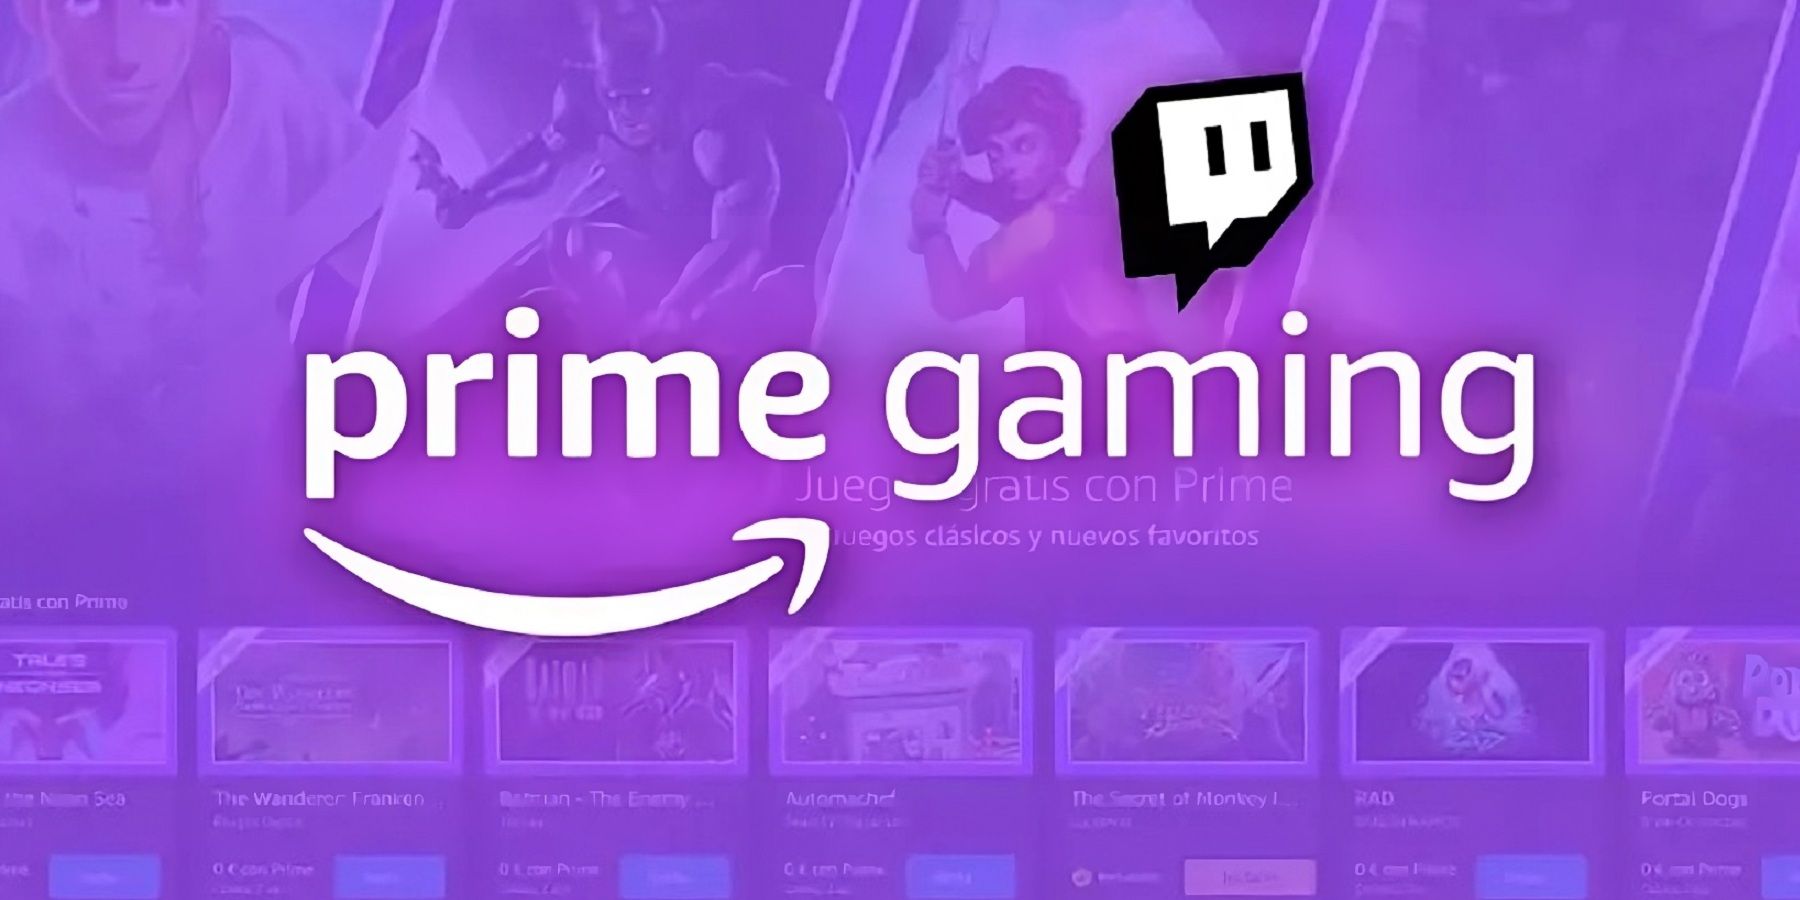 Here Are The  Prime Gaming Free Games For February 2023